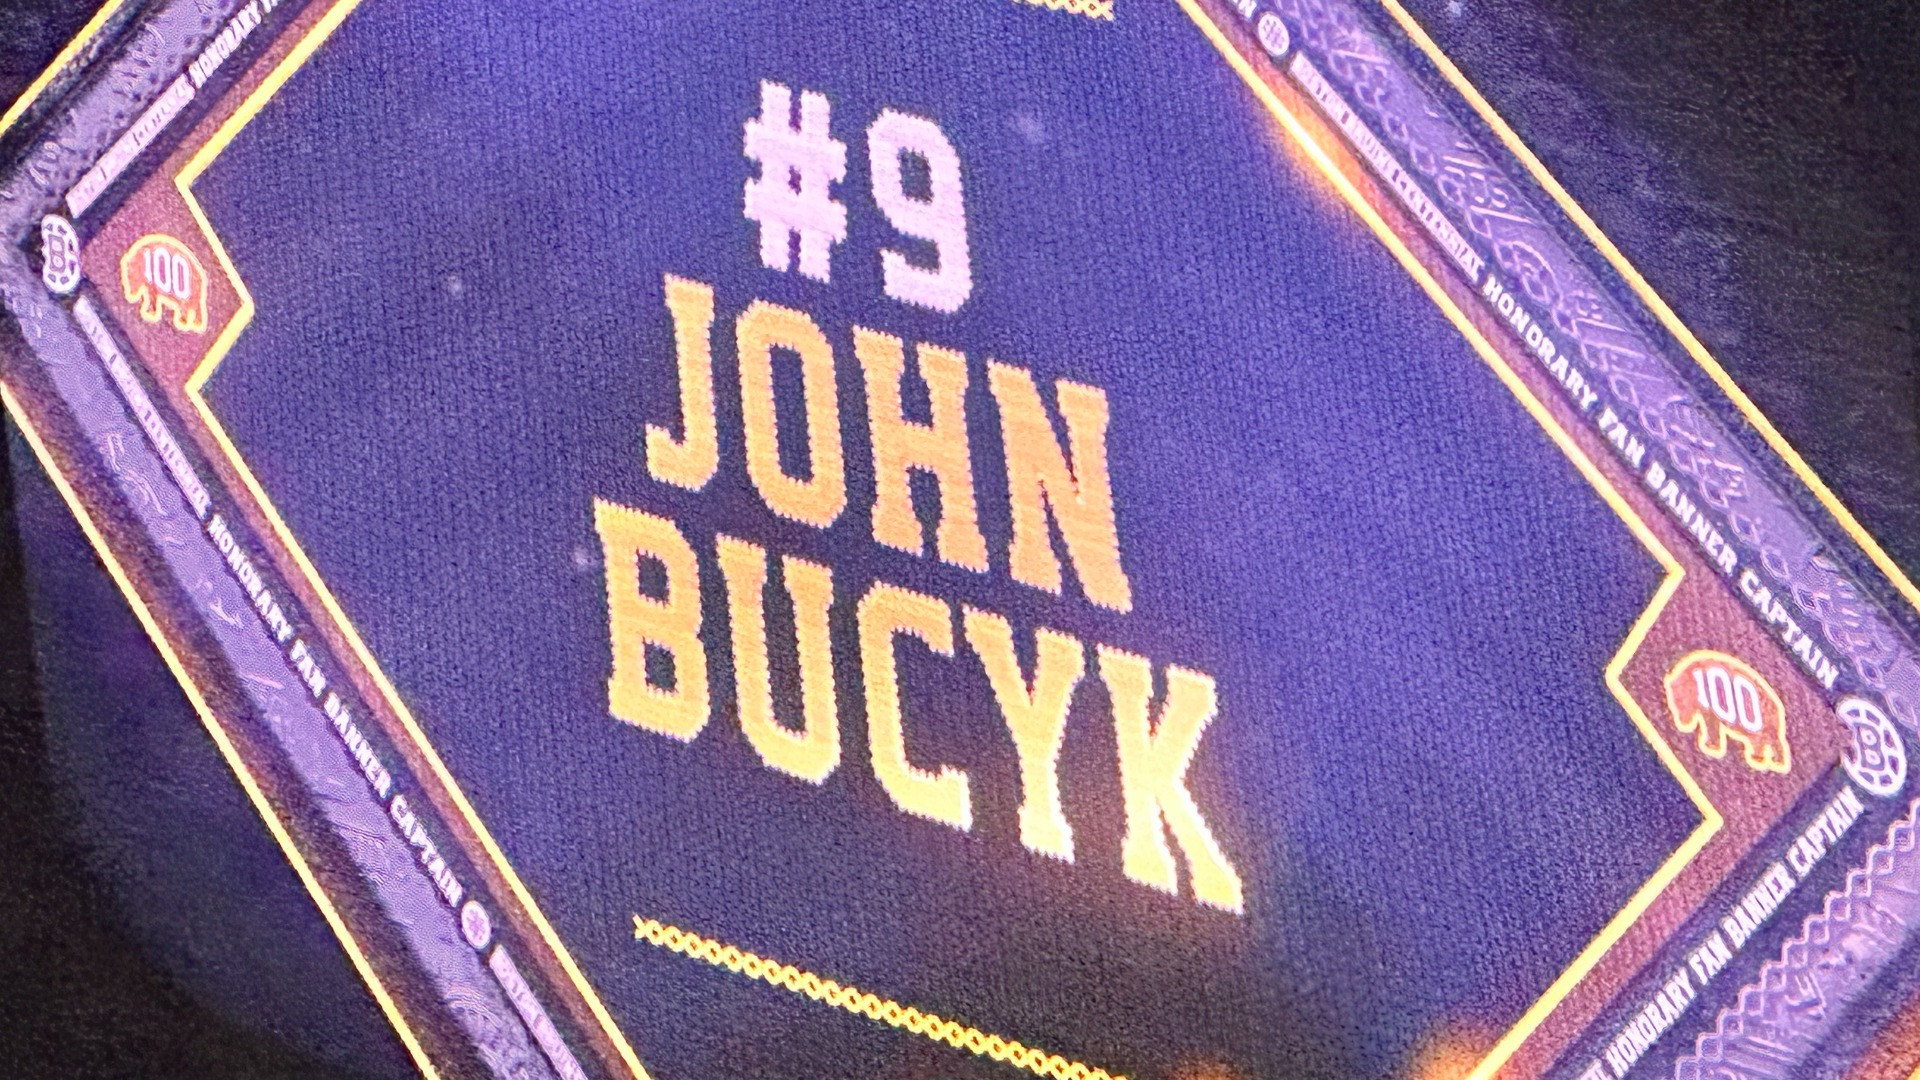 Johnny Bucyk Chosen As Bruins Honorary Fan Banner Captain For Game 4